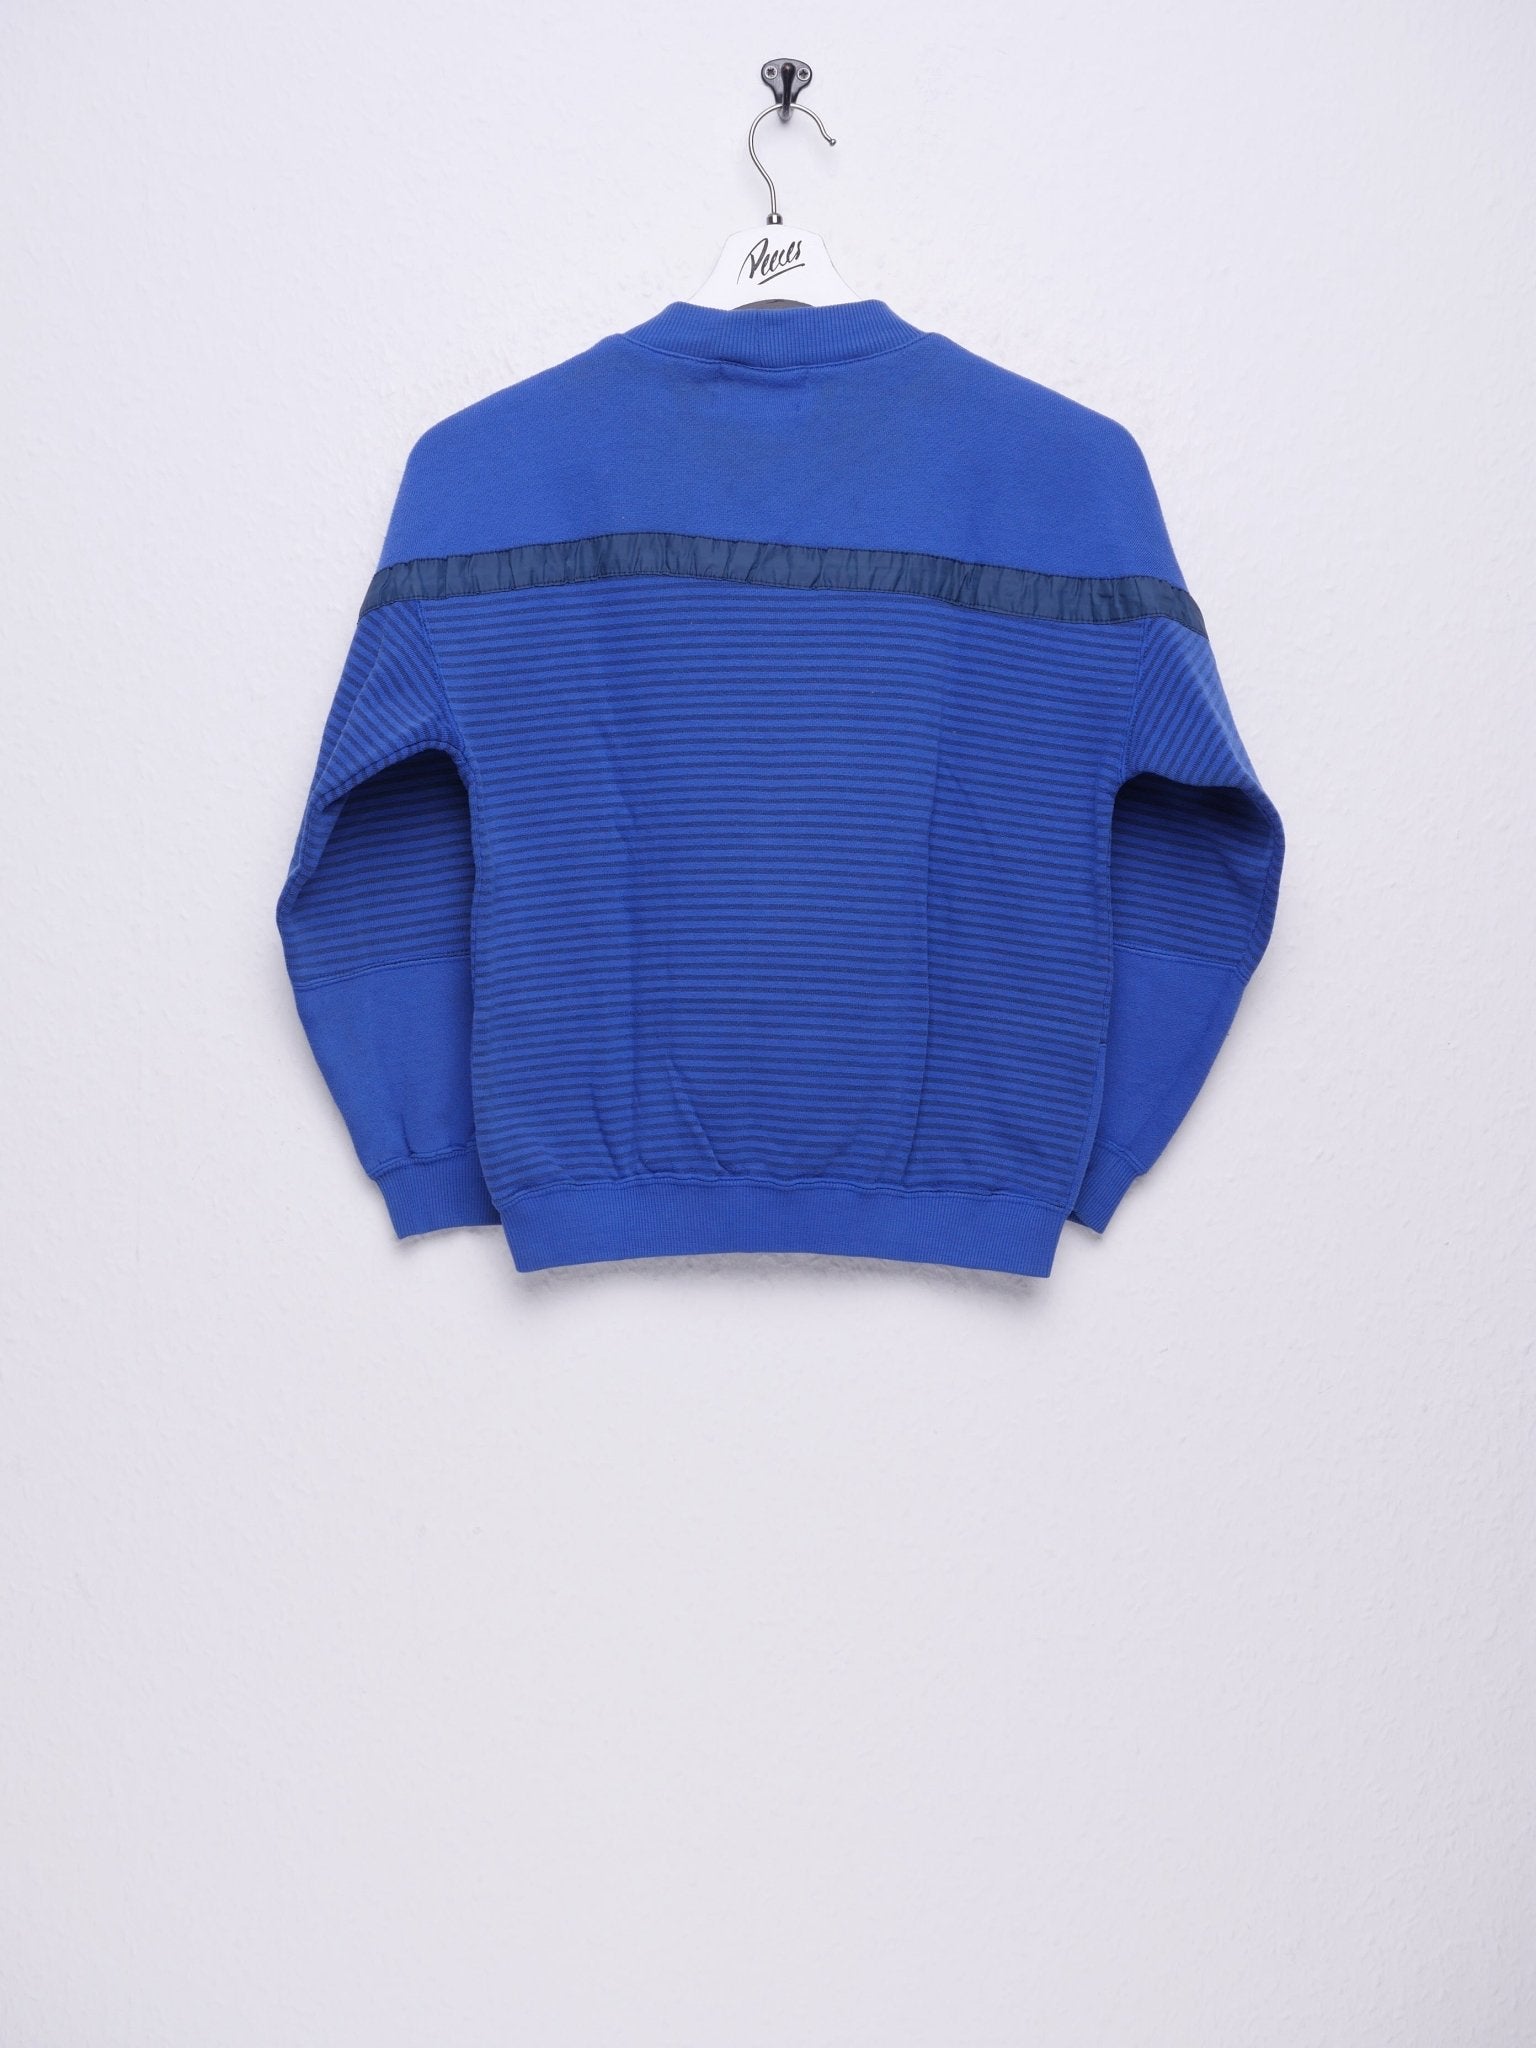 embroidered Logos washed blue Vintage Sweater - Peeces